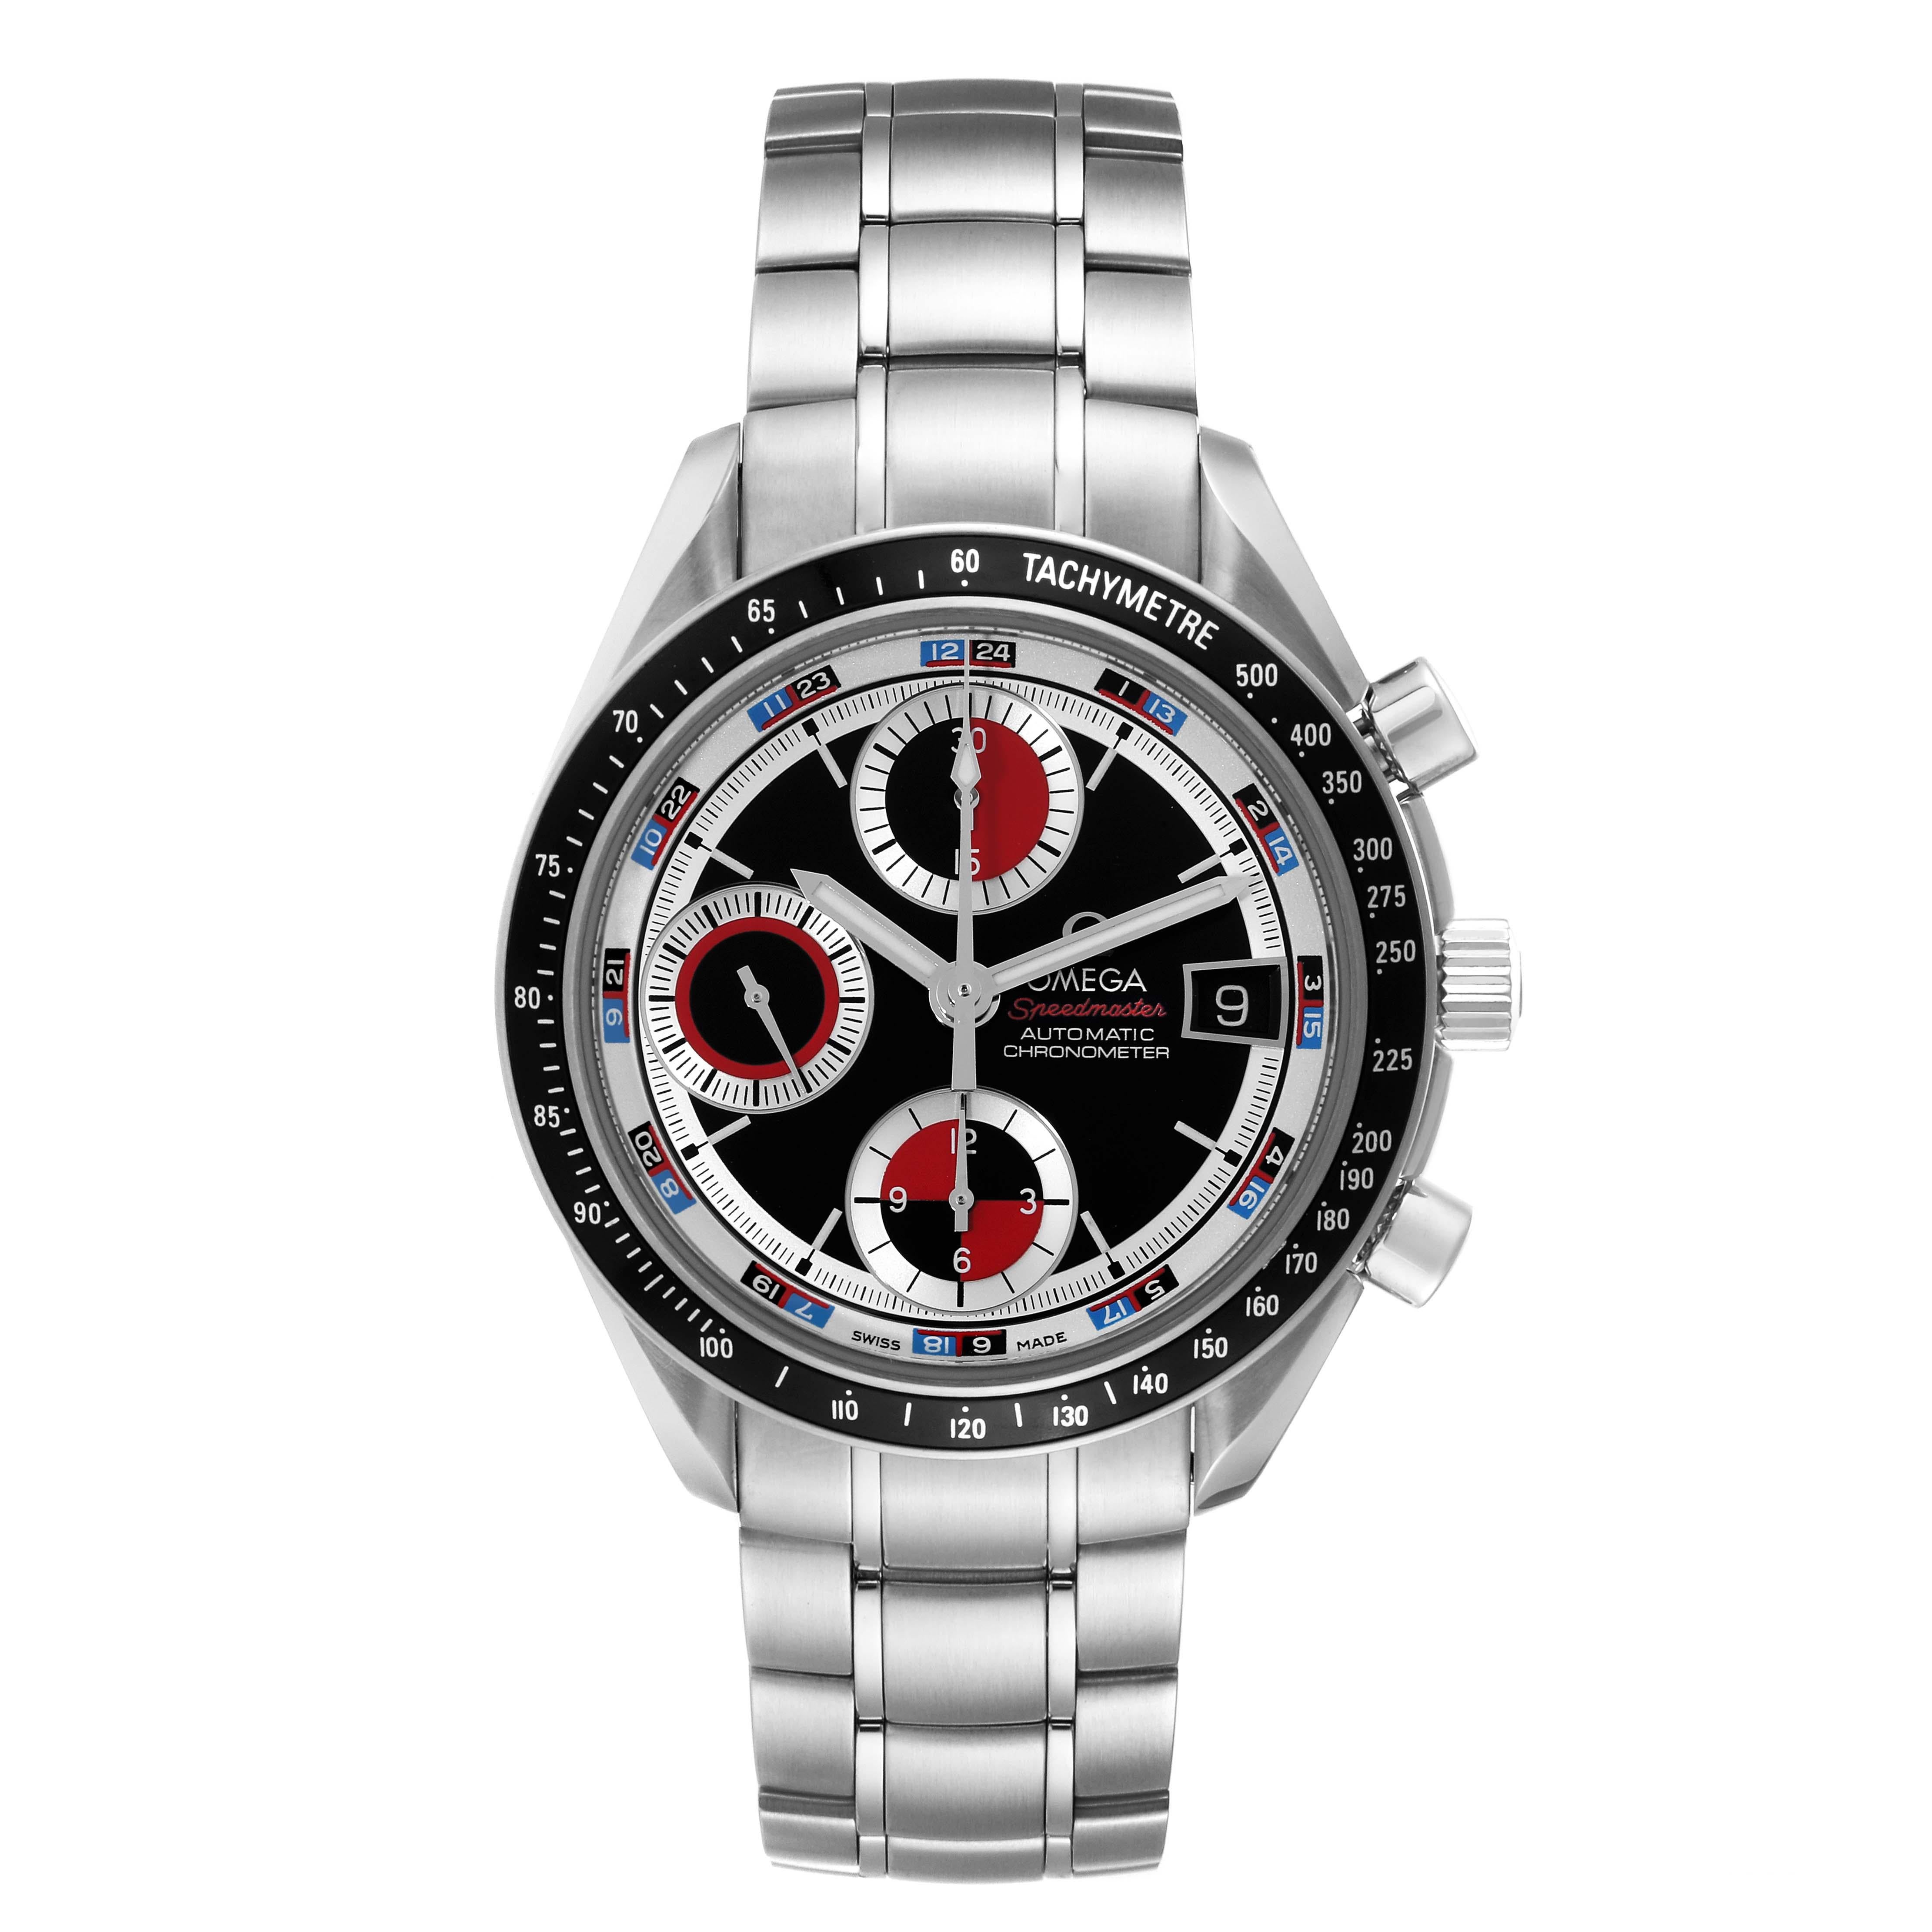 Omega Speedmaster Black Red Casino Dial Steel Mens Watch 3210.52.00 Card. Automatic self-winding chronograph movement. Stainless steel round case 40 mm in diameter. Black bezel with tachymetric scale. Scratch-resistant sapphire crystal with